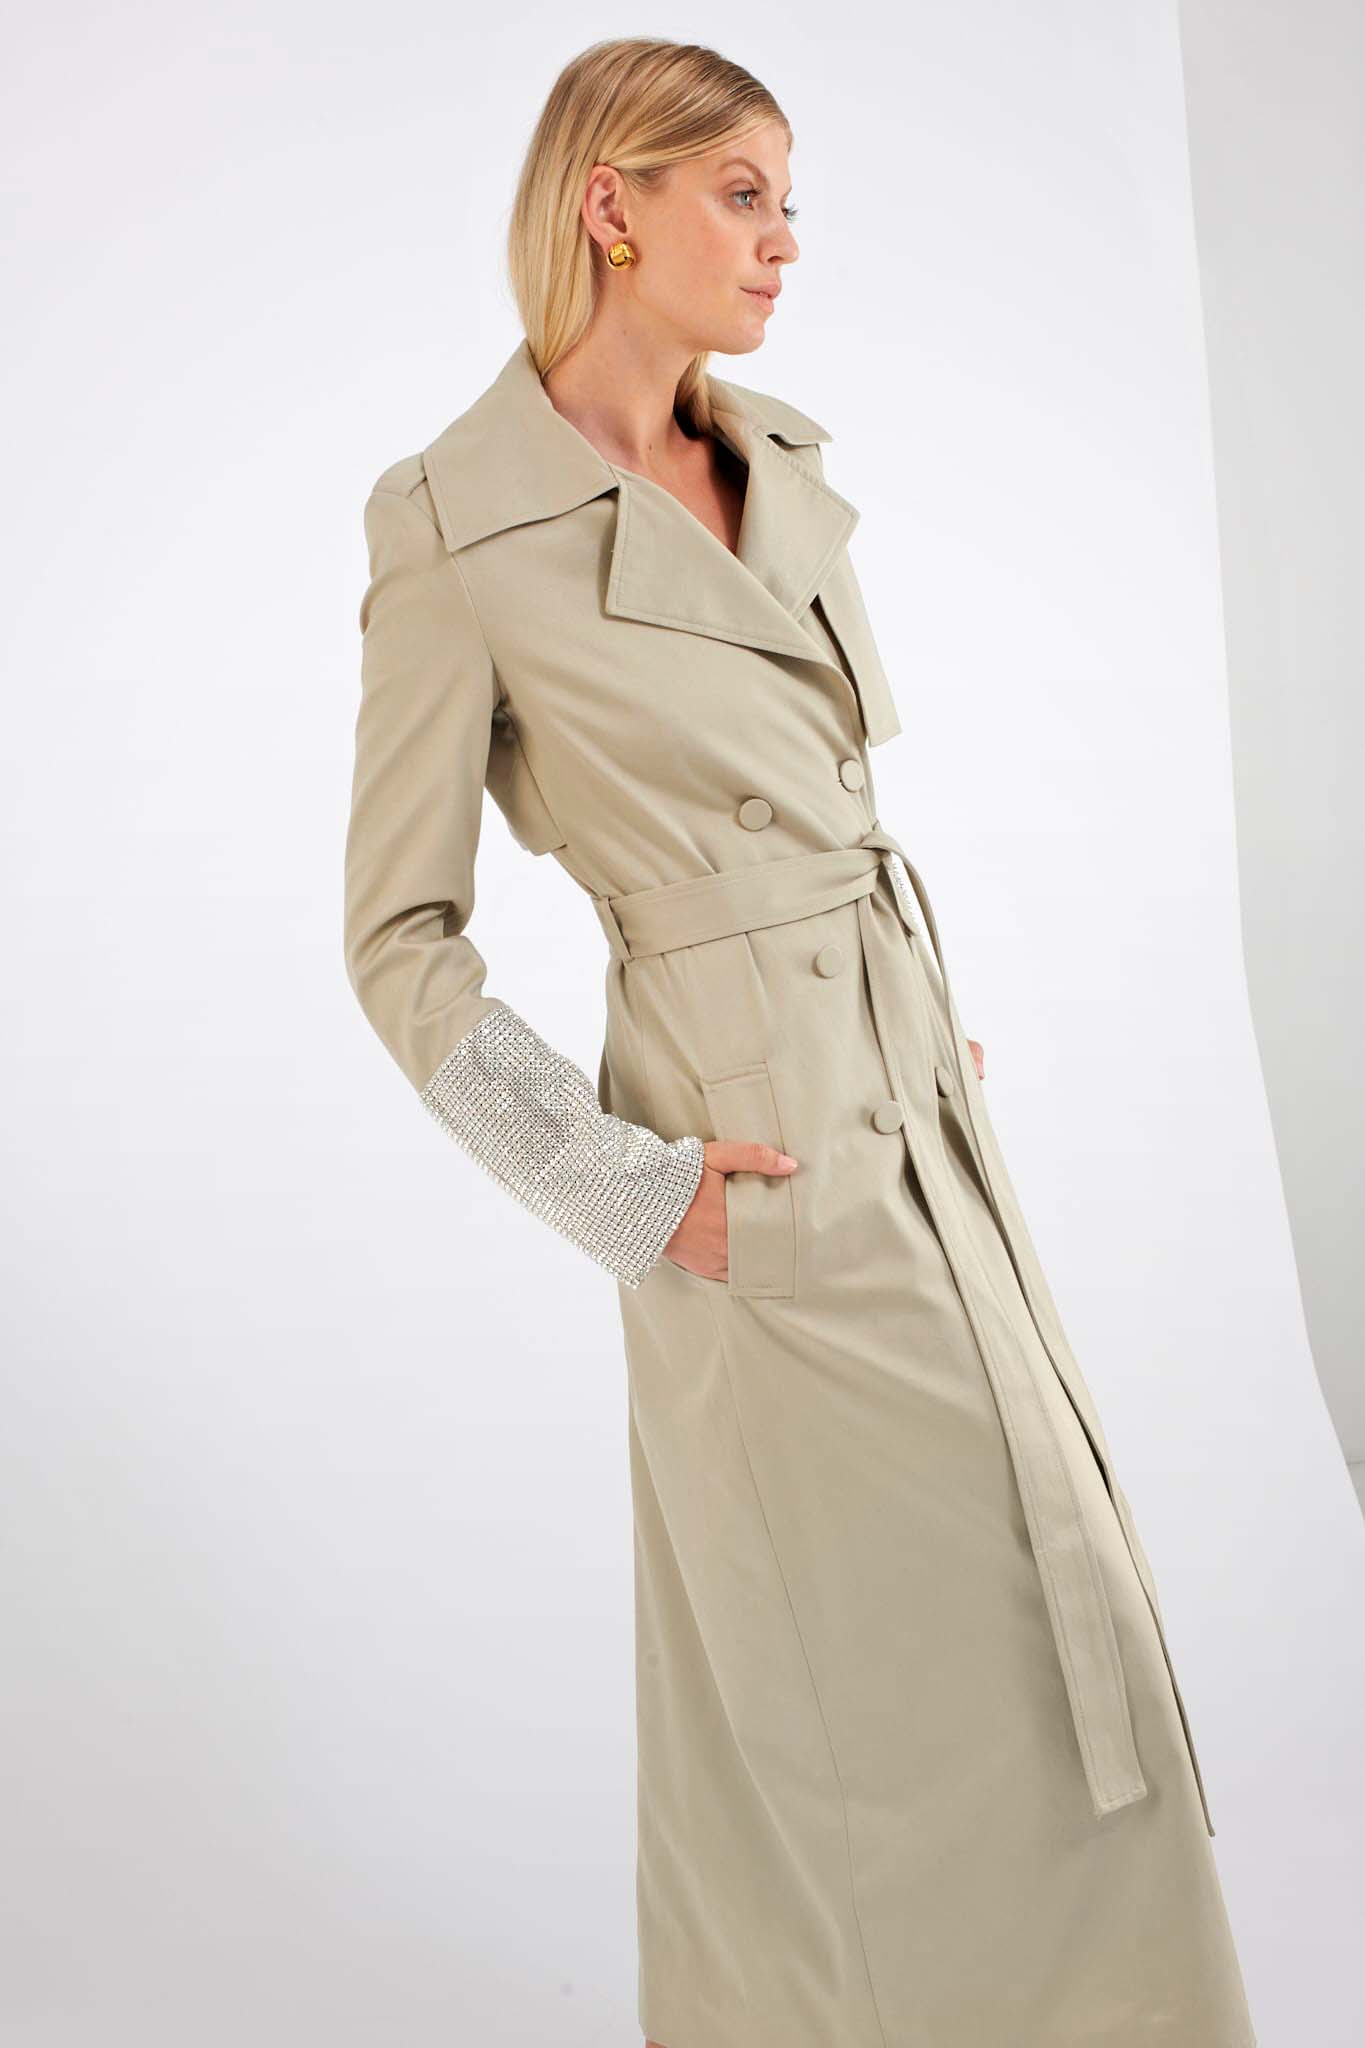 Linda Trench coat from Florence and Fortitude